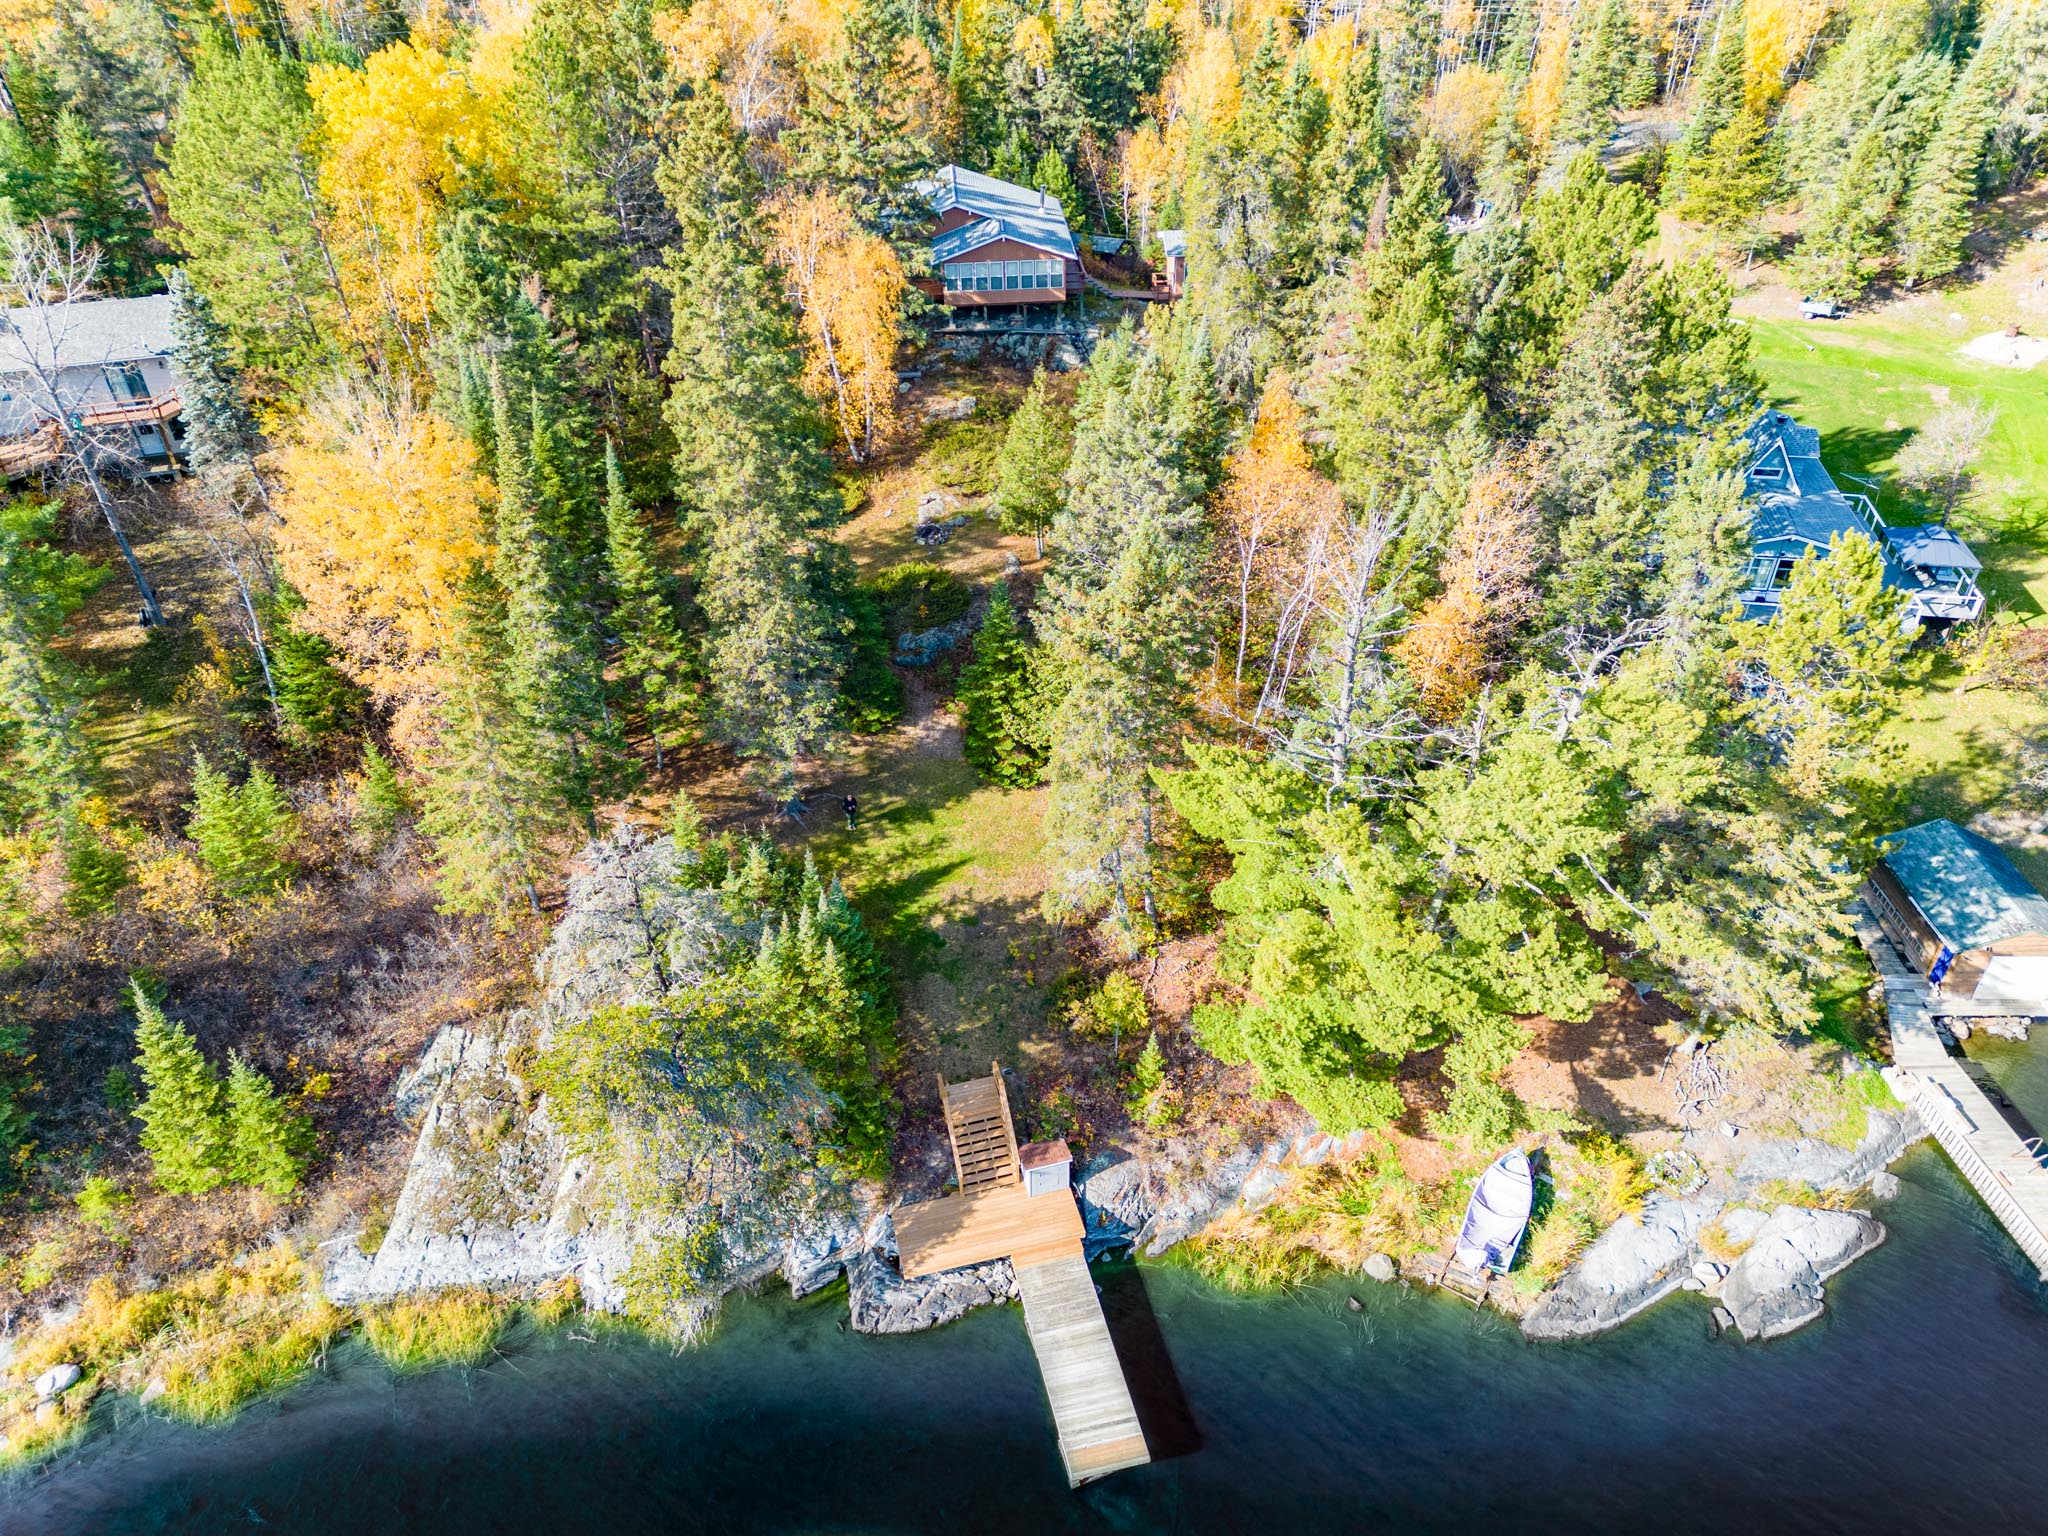 Overhead view of a lakefront property surrounded by trees, with a dock extending into the water.